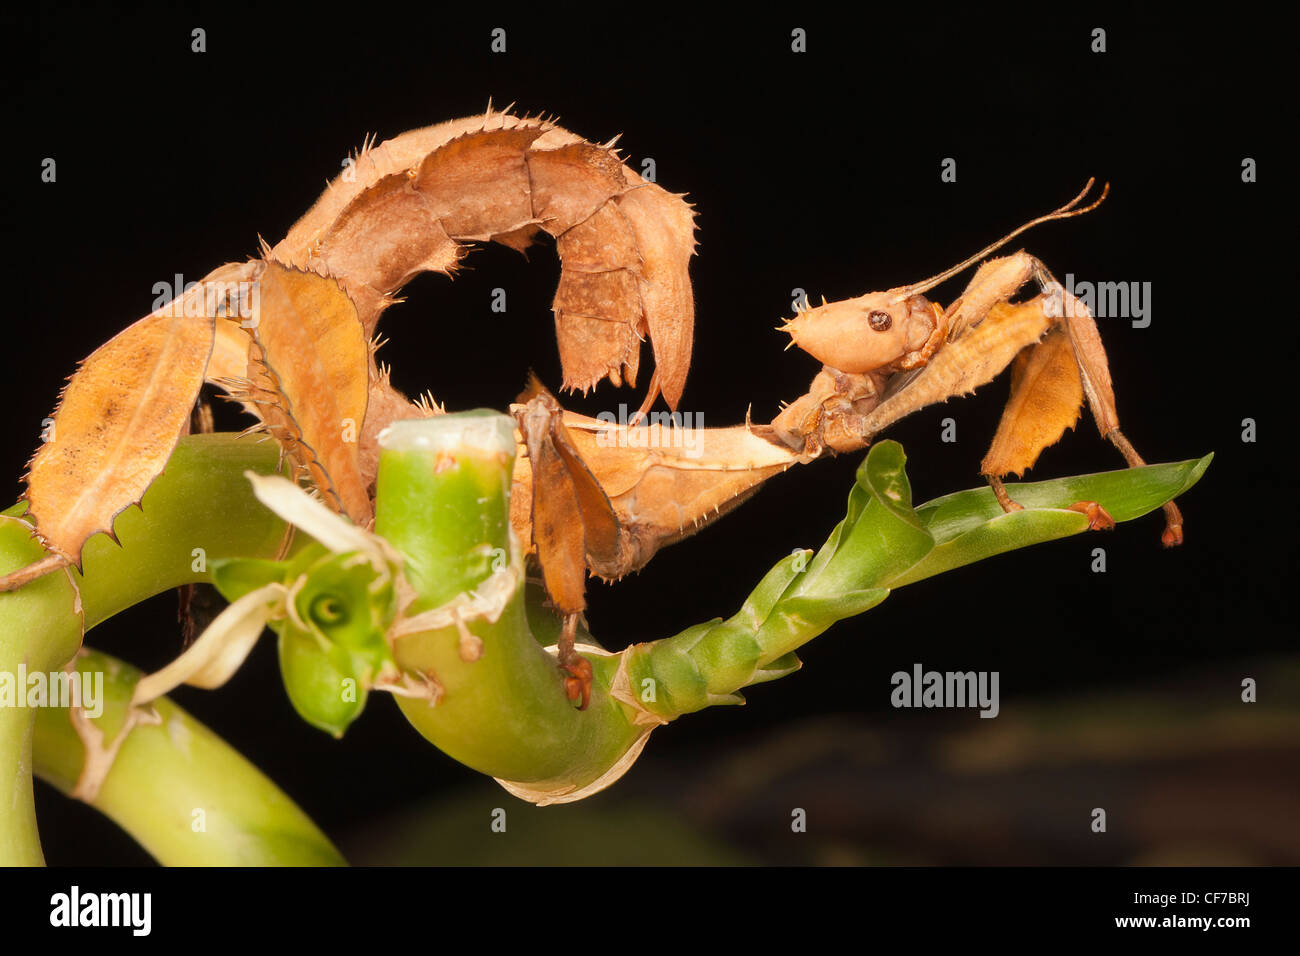 Prickly Stick Insect (Extatosoma tiaratum) mimicing the pose of a scorpion Stock Photo